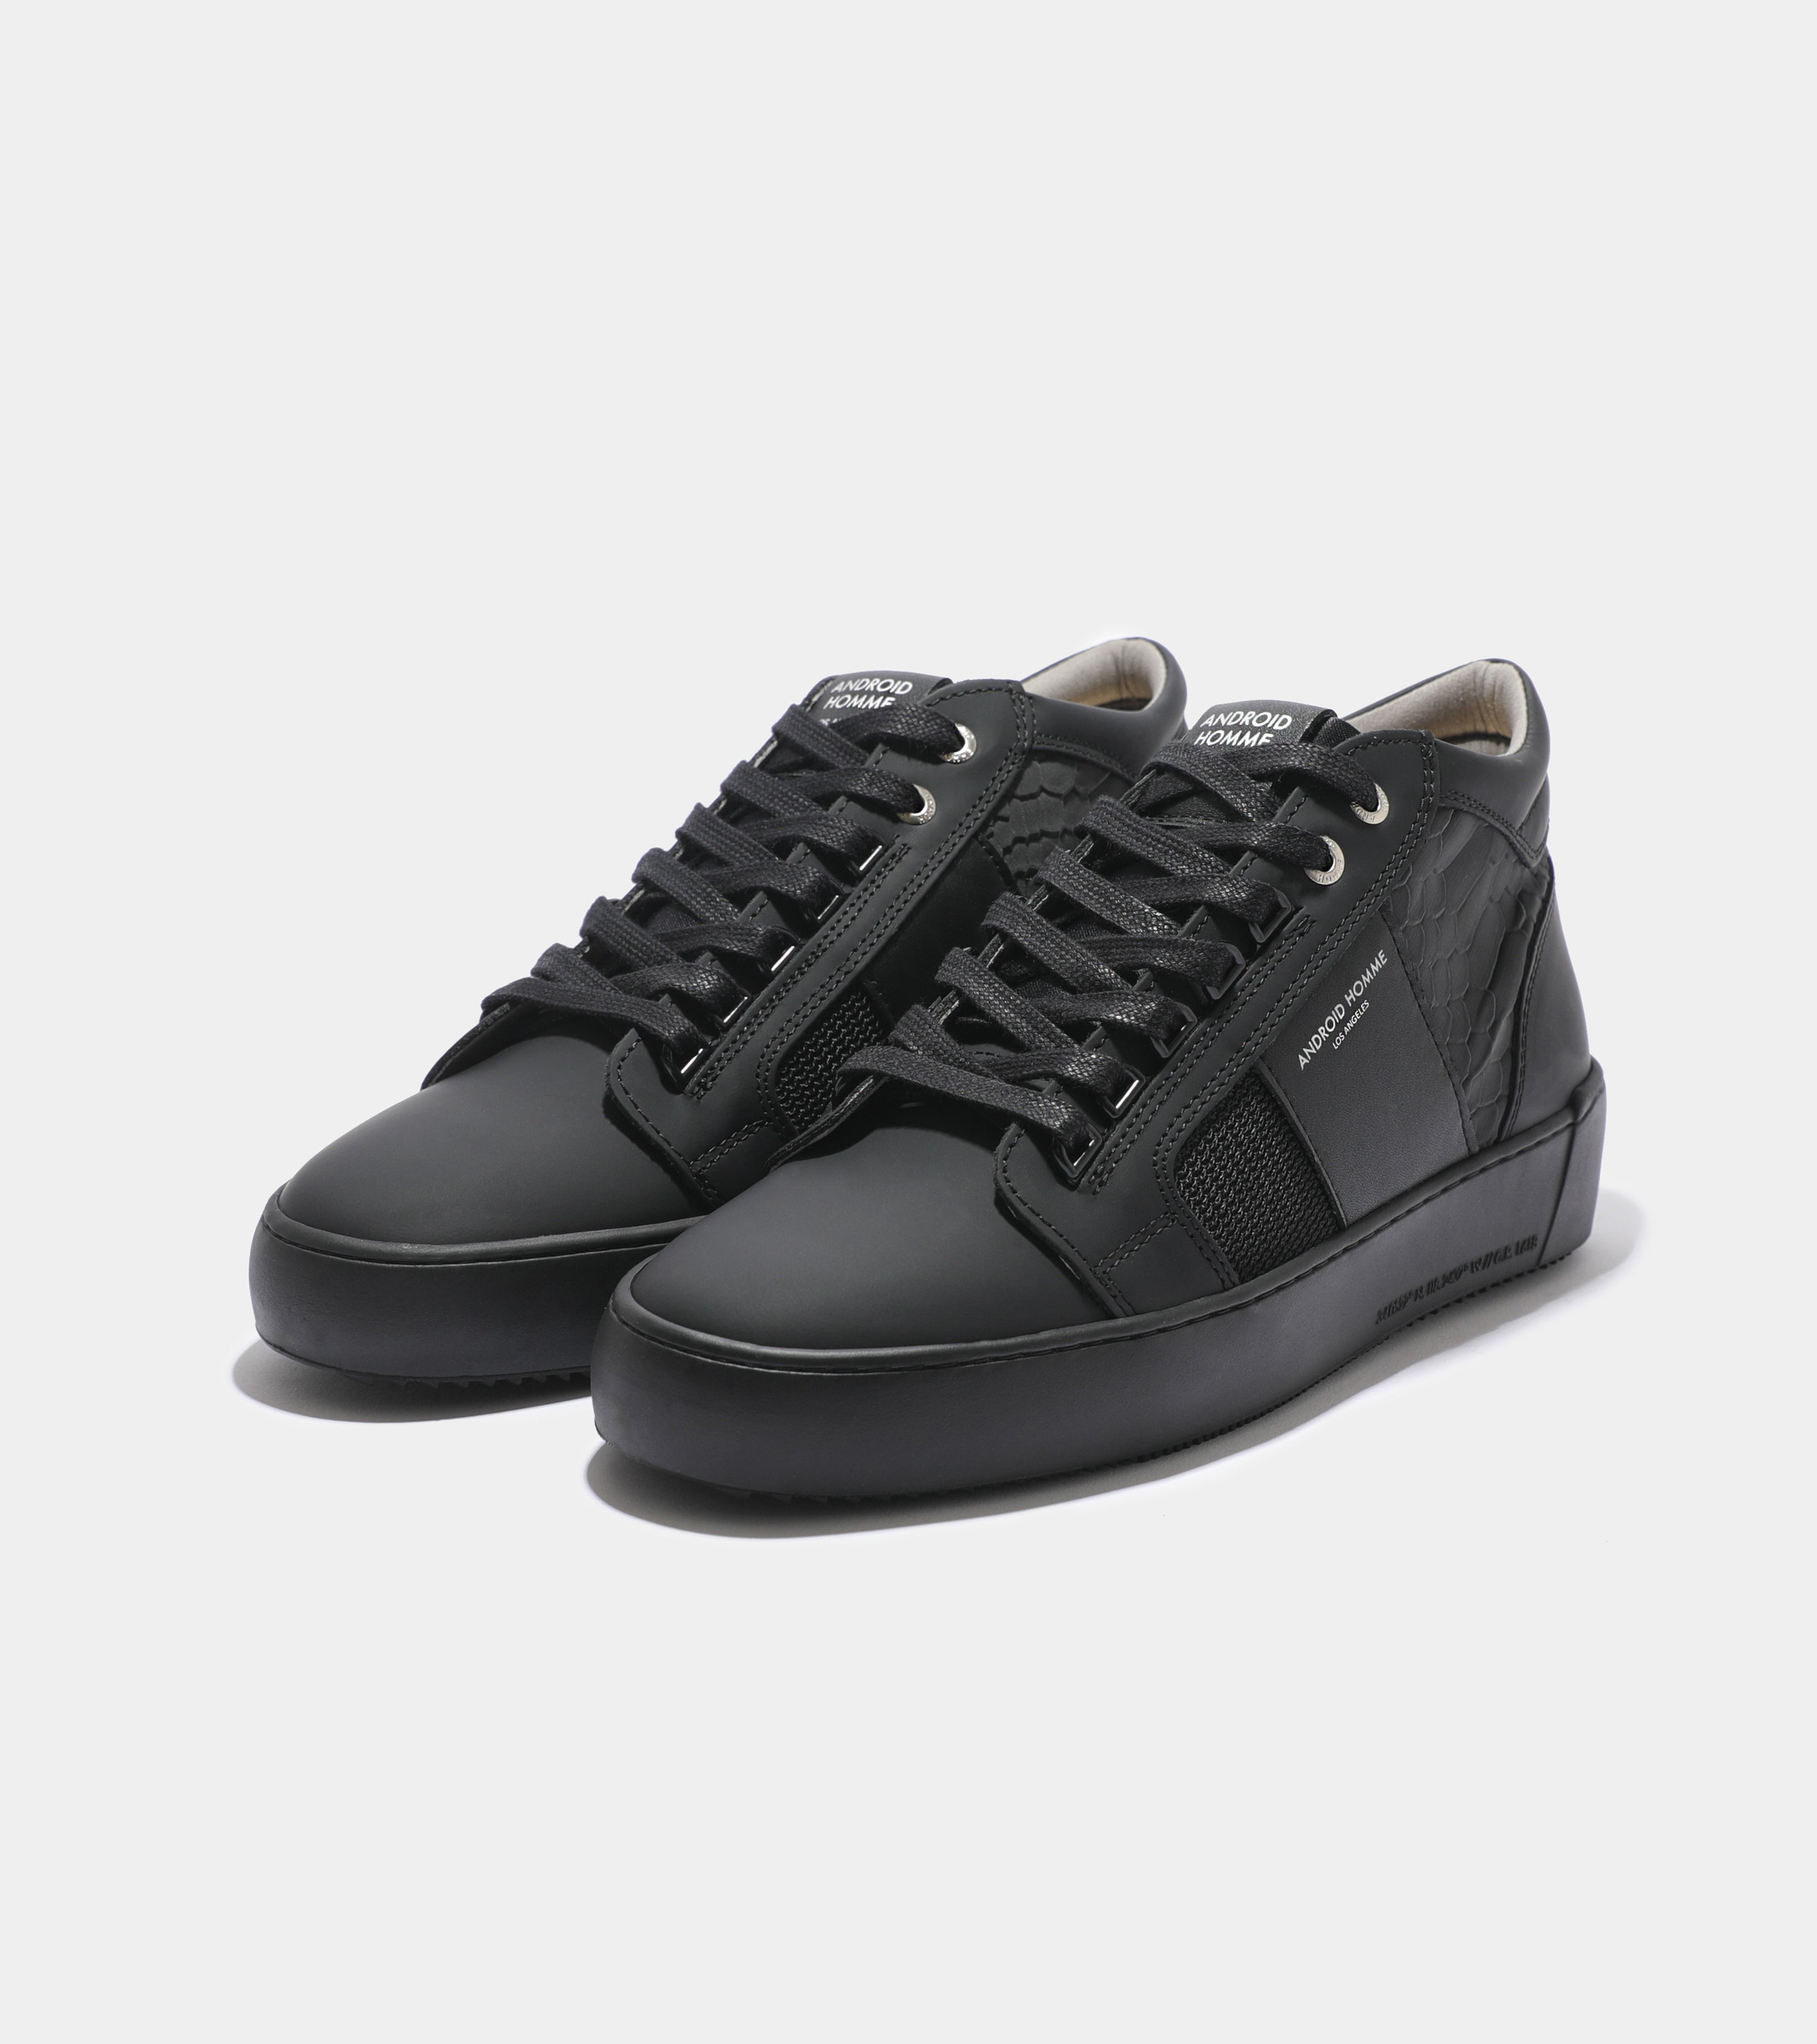 Ecom imagery of the Propulsion Mid Black Gomma Reflective Python Android Homme Trainers.